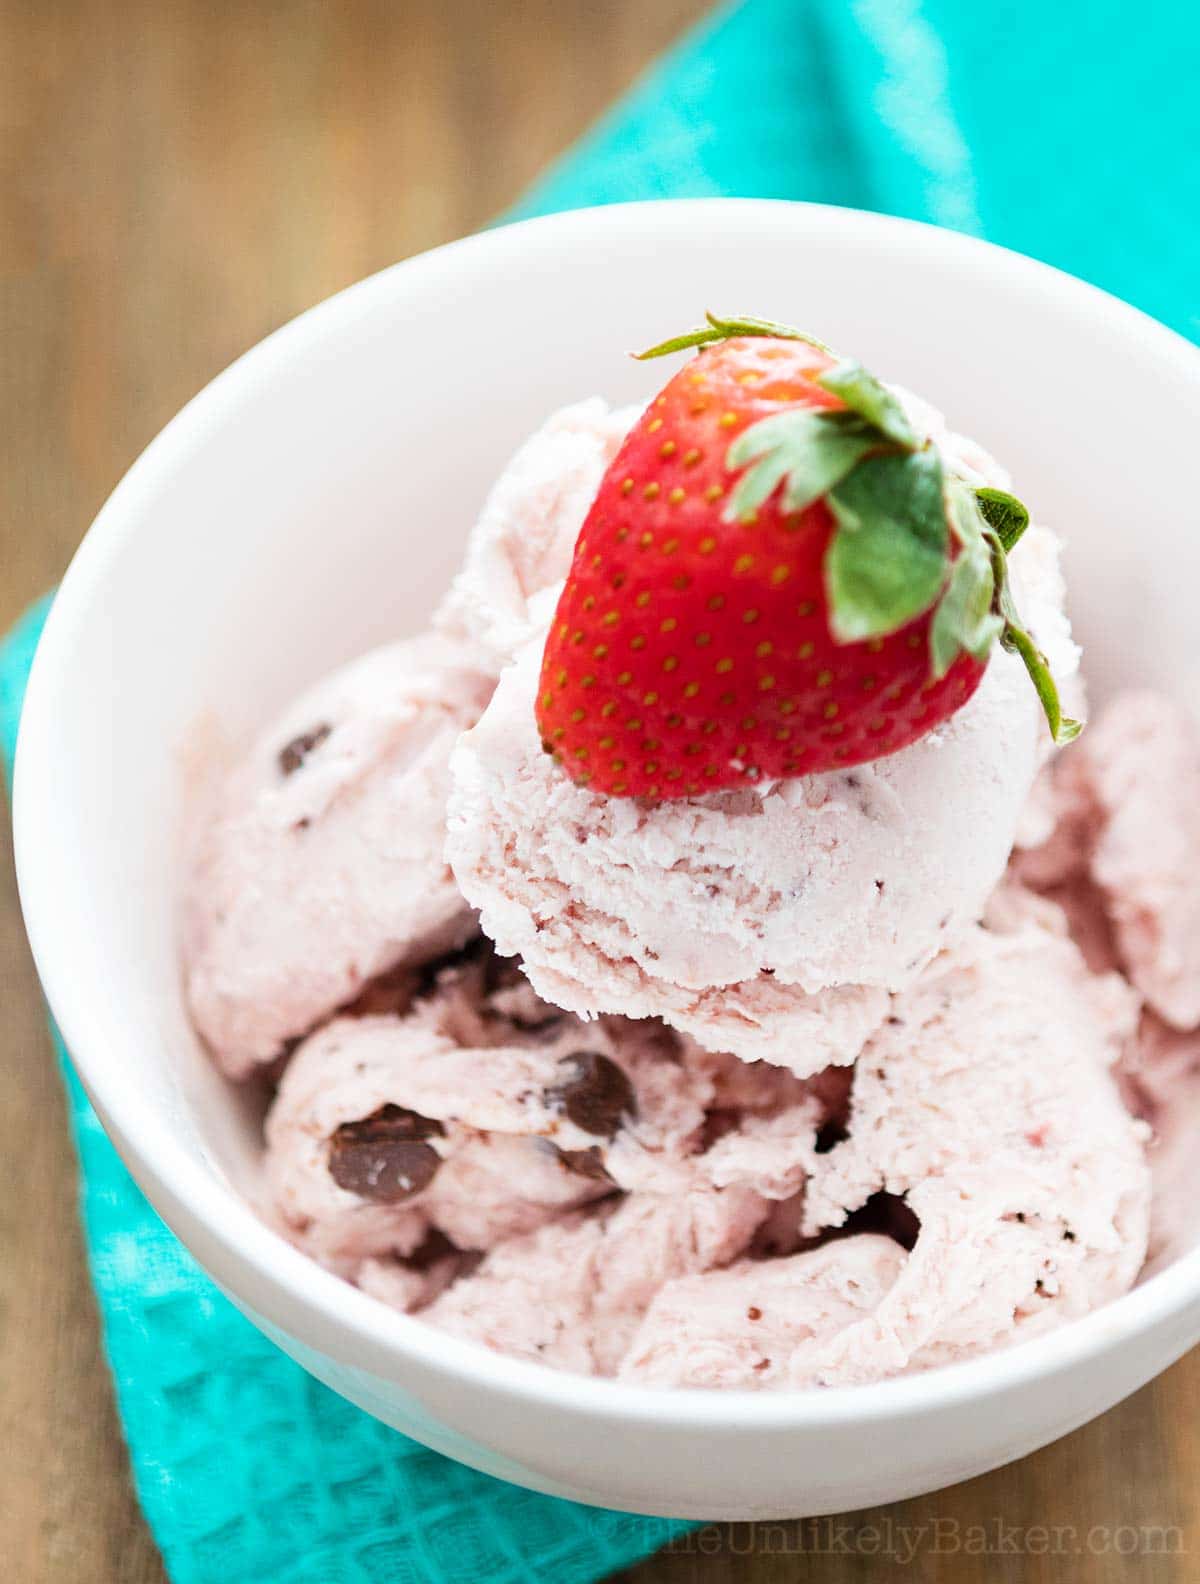 Strawberry ice cream with chocolate chips in a bowl.